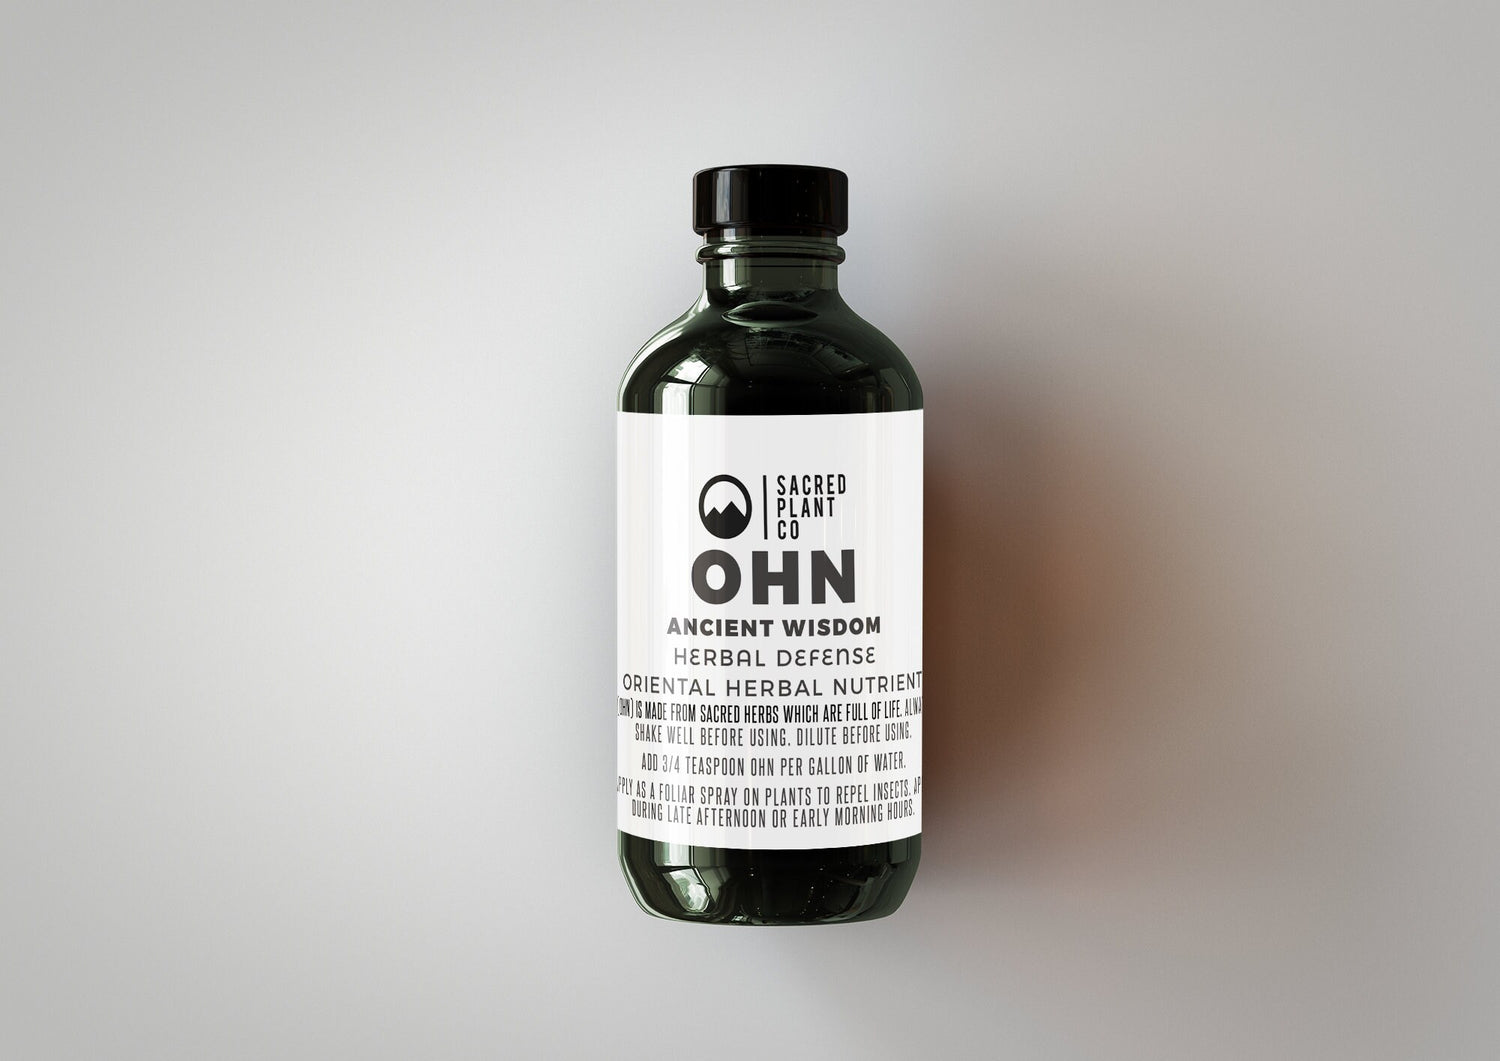 Bottle of our protective HERBAL DEFENSE - OHN, crafted with care at Low Water Colorado Mountain Herb Farm